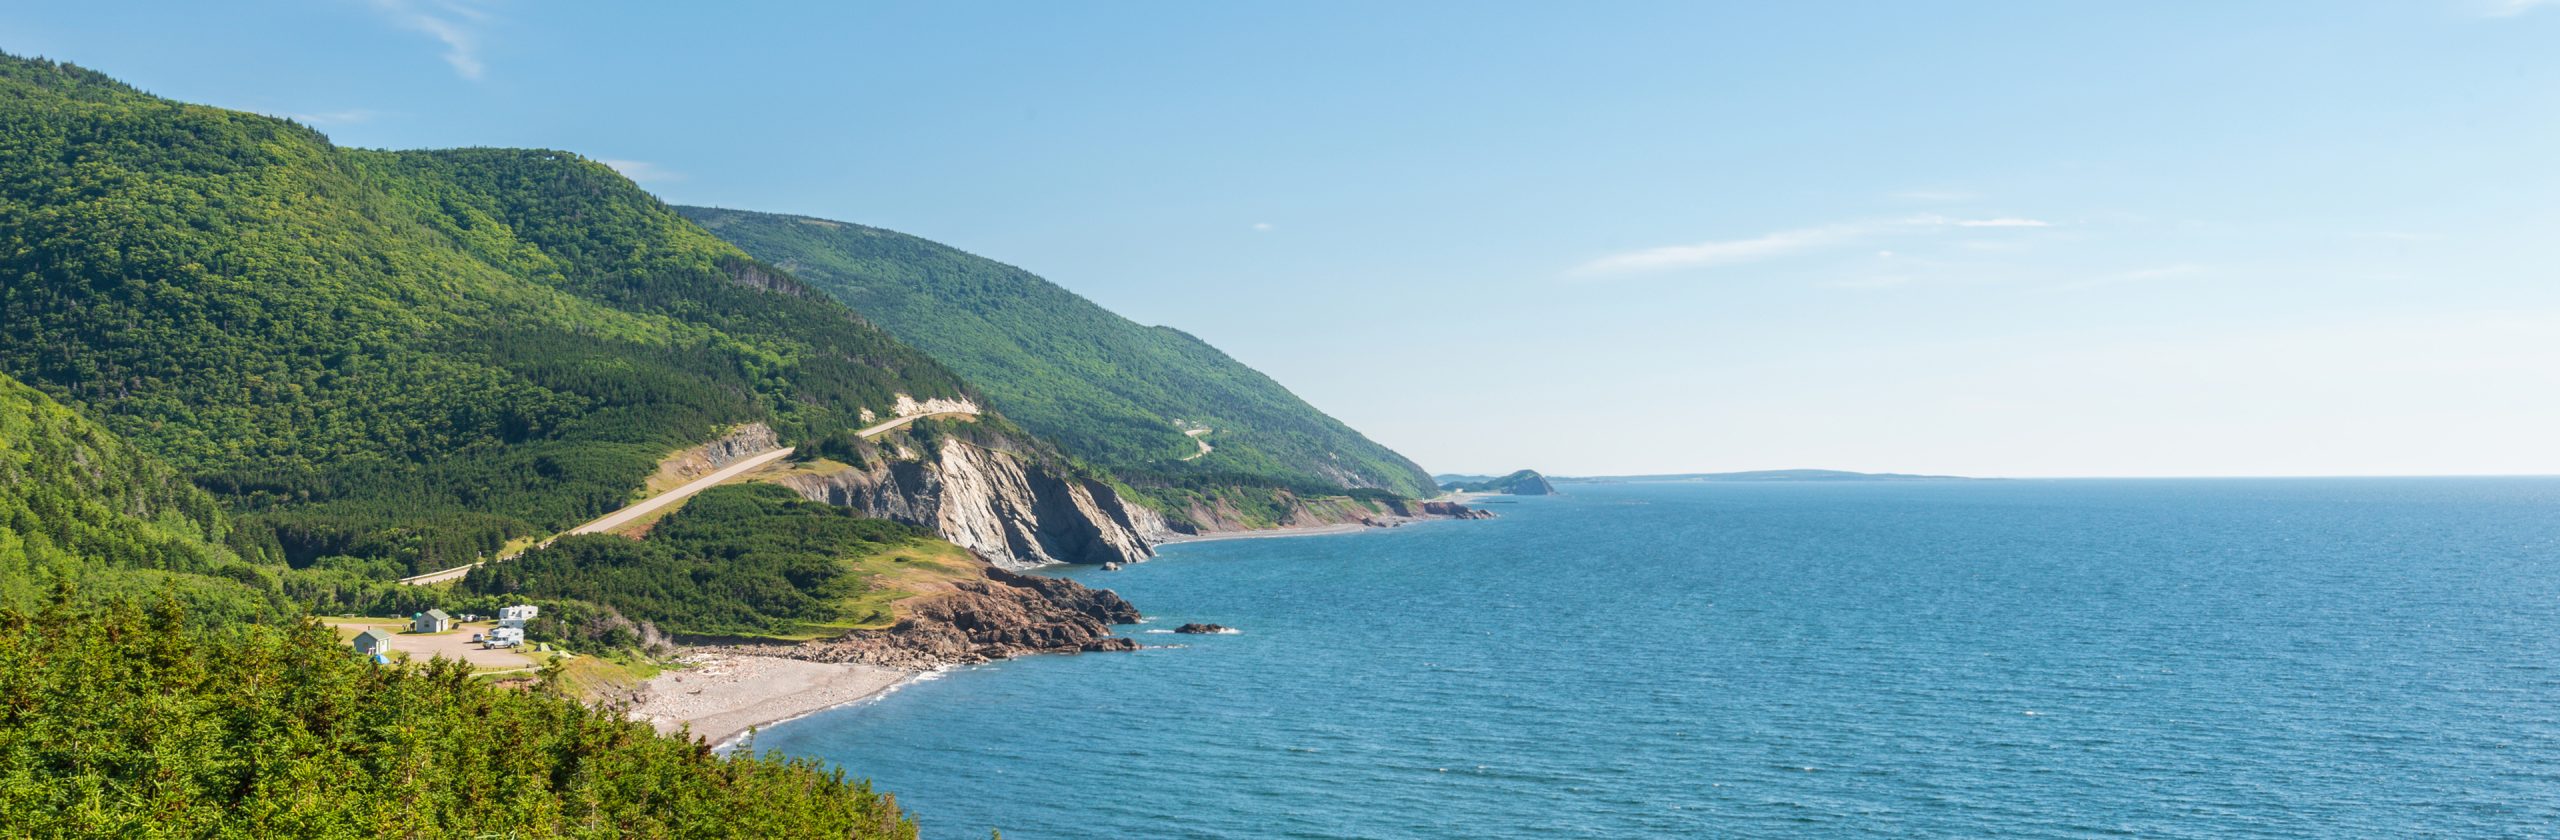 Cape Breton Island and Cabot Trail by bicycle